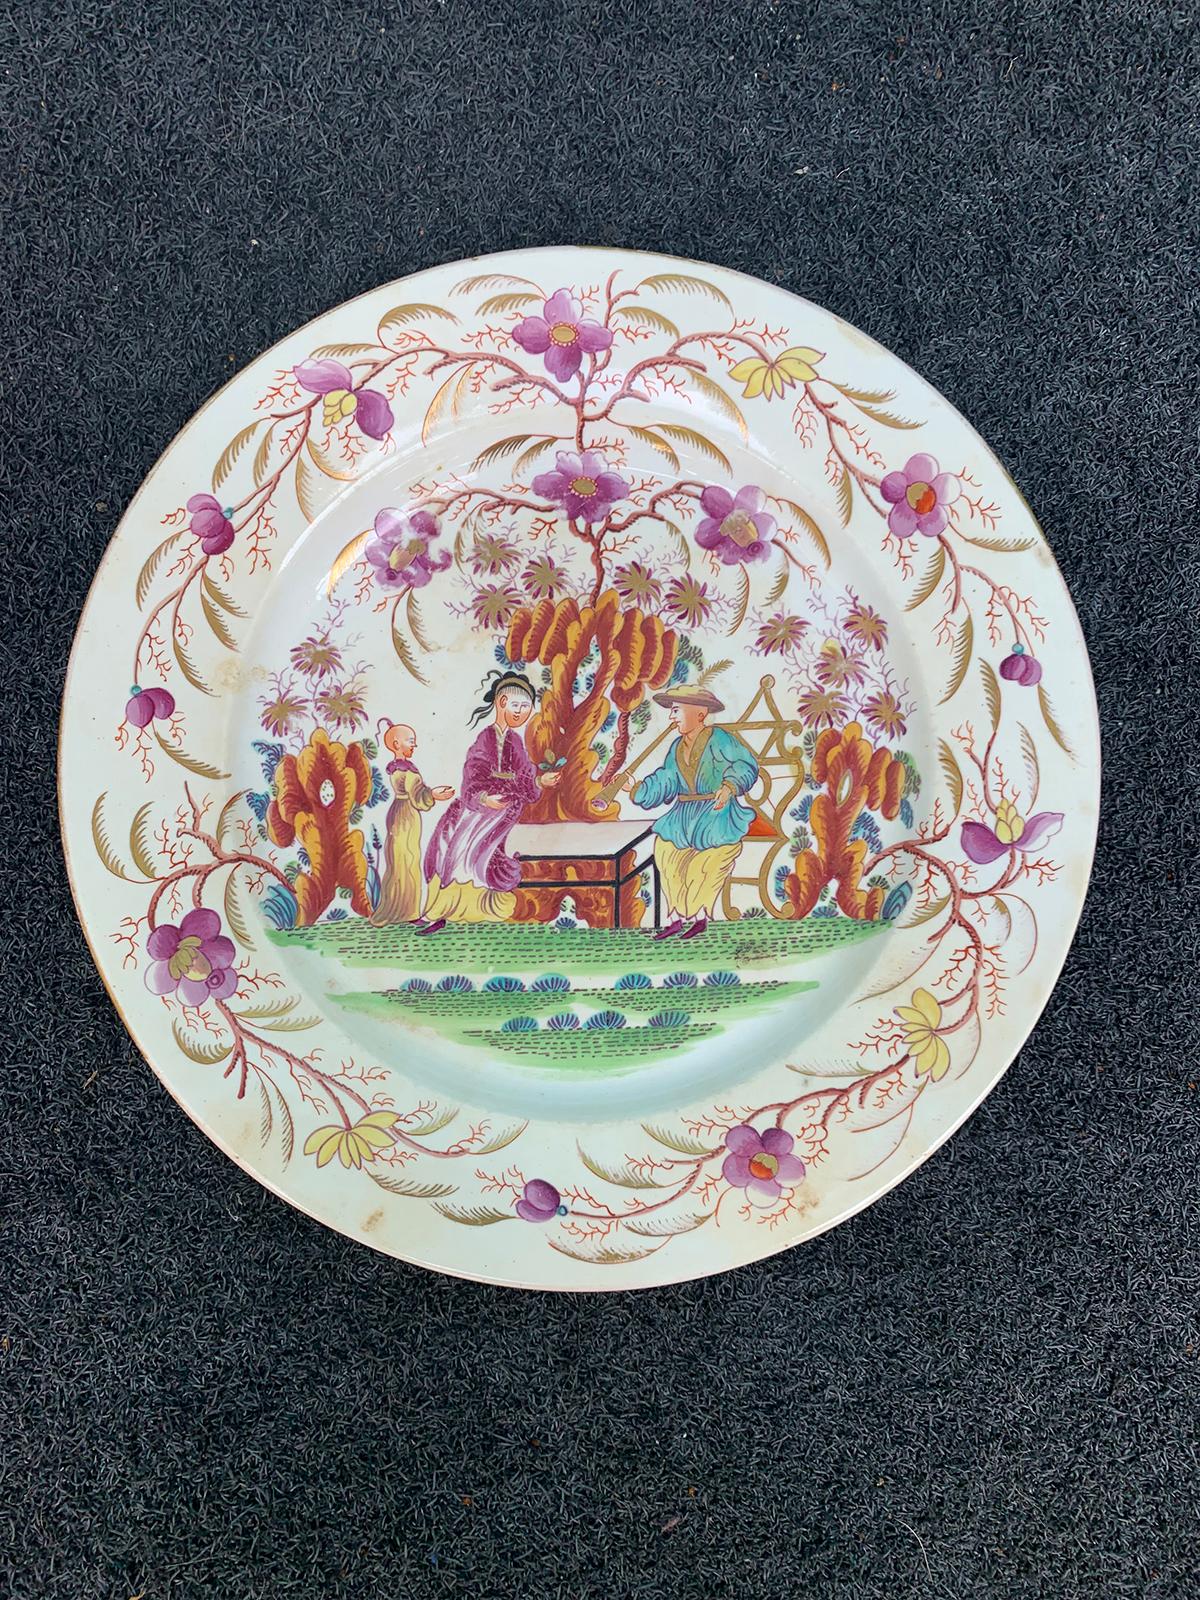 18th century English porcelain plate, possibly new hall.